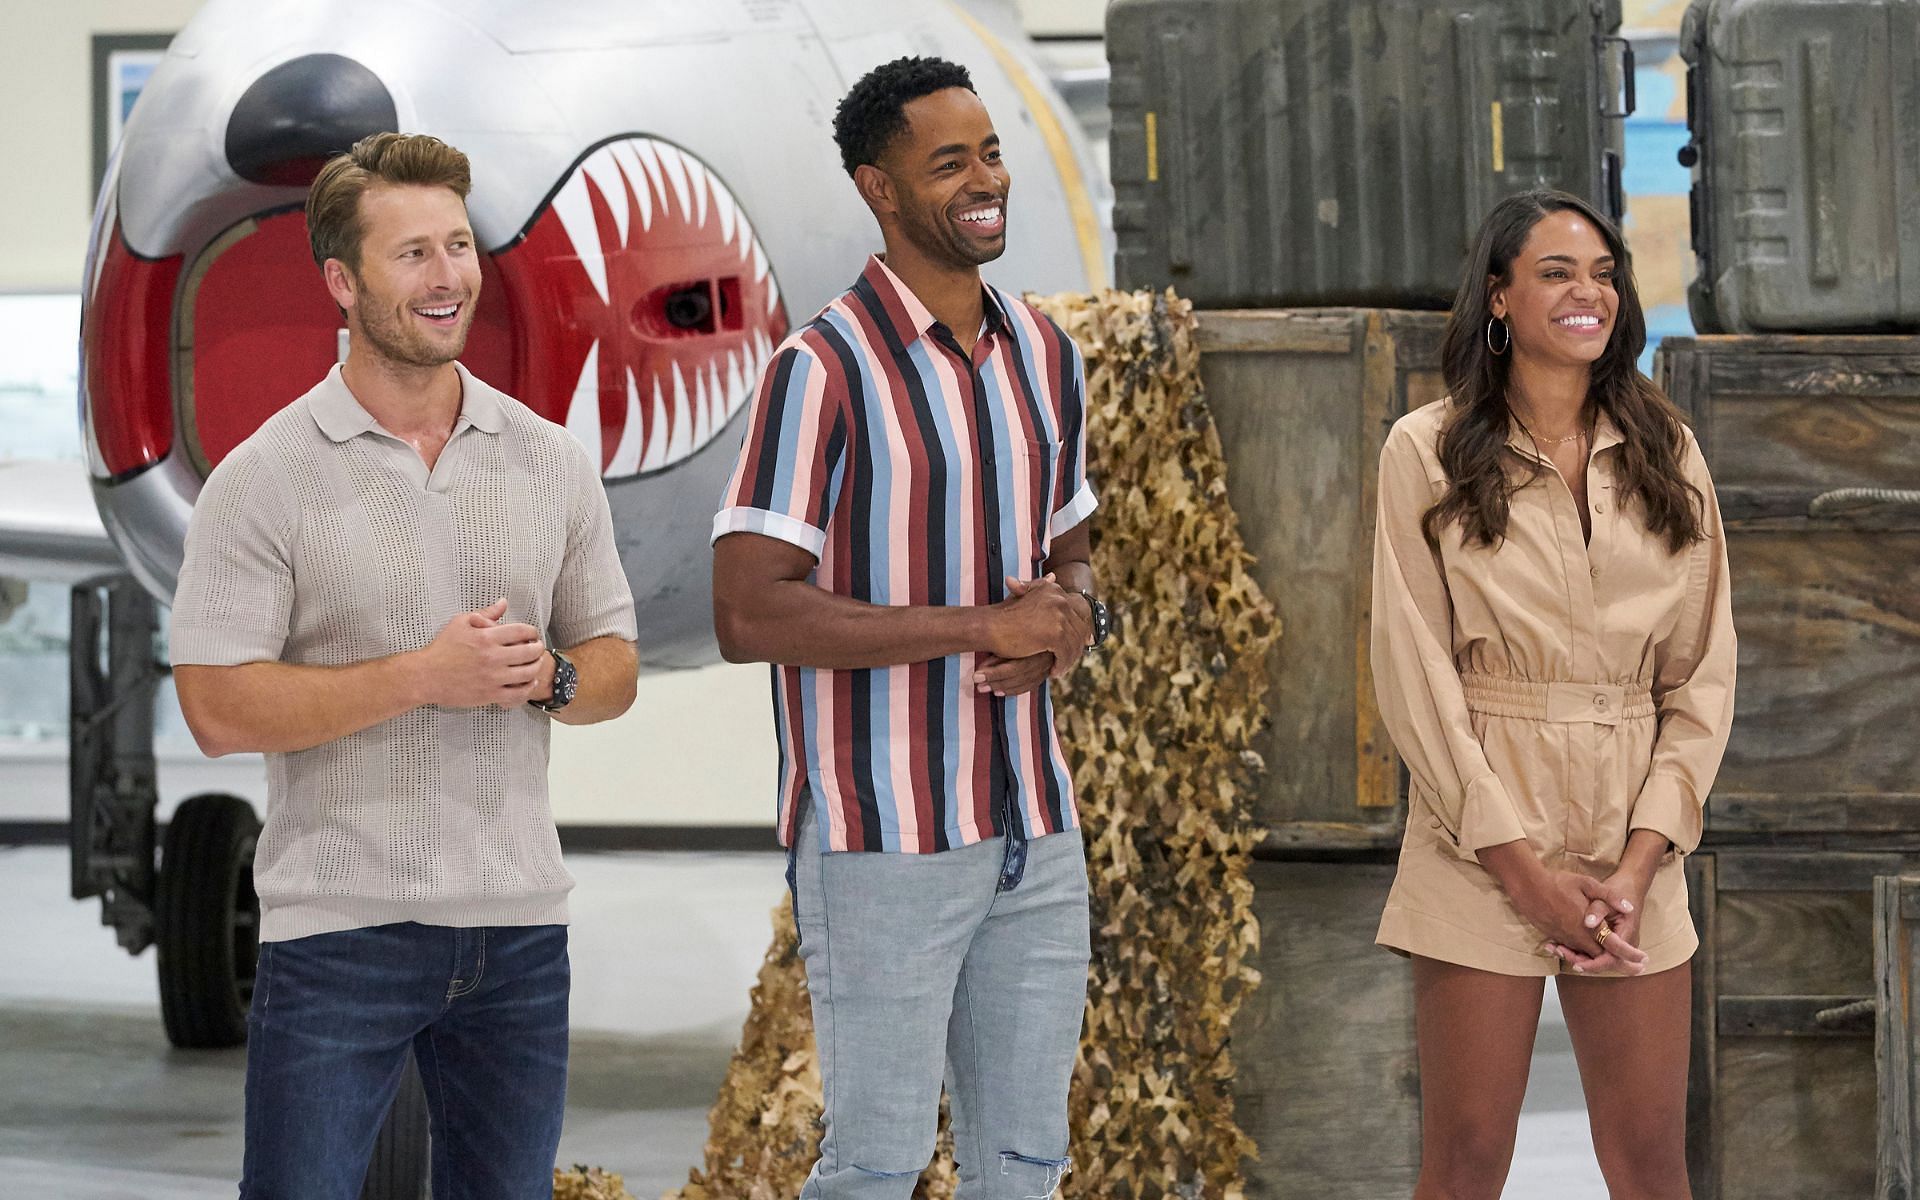 &lsquo;The Bachelorette&rsquo; Michelle Young with Glen Powell and Jay Ellis (Image via Craig Sjodin/ABC)